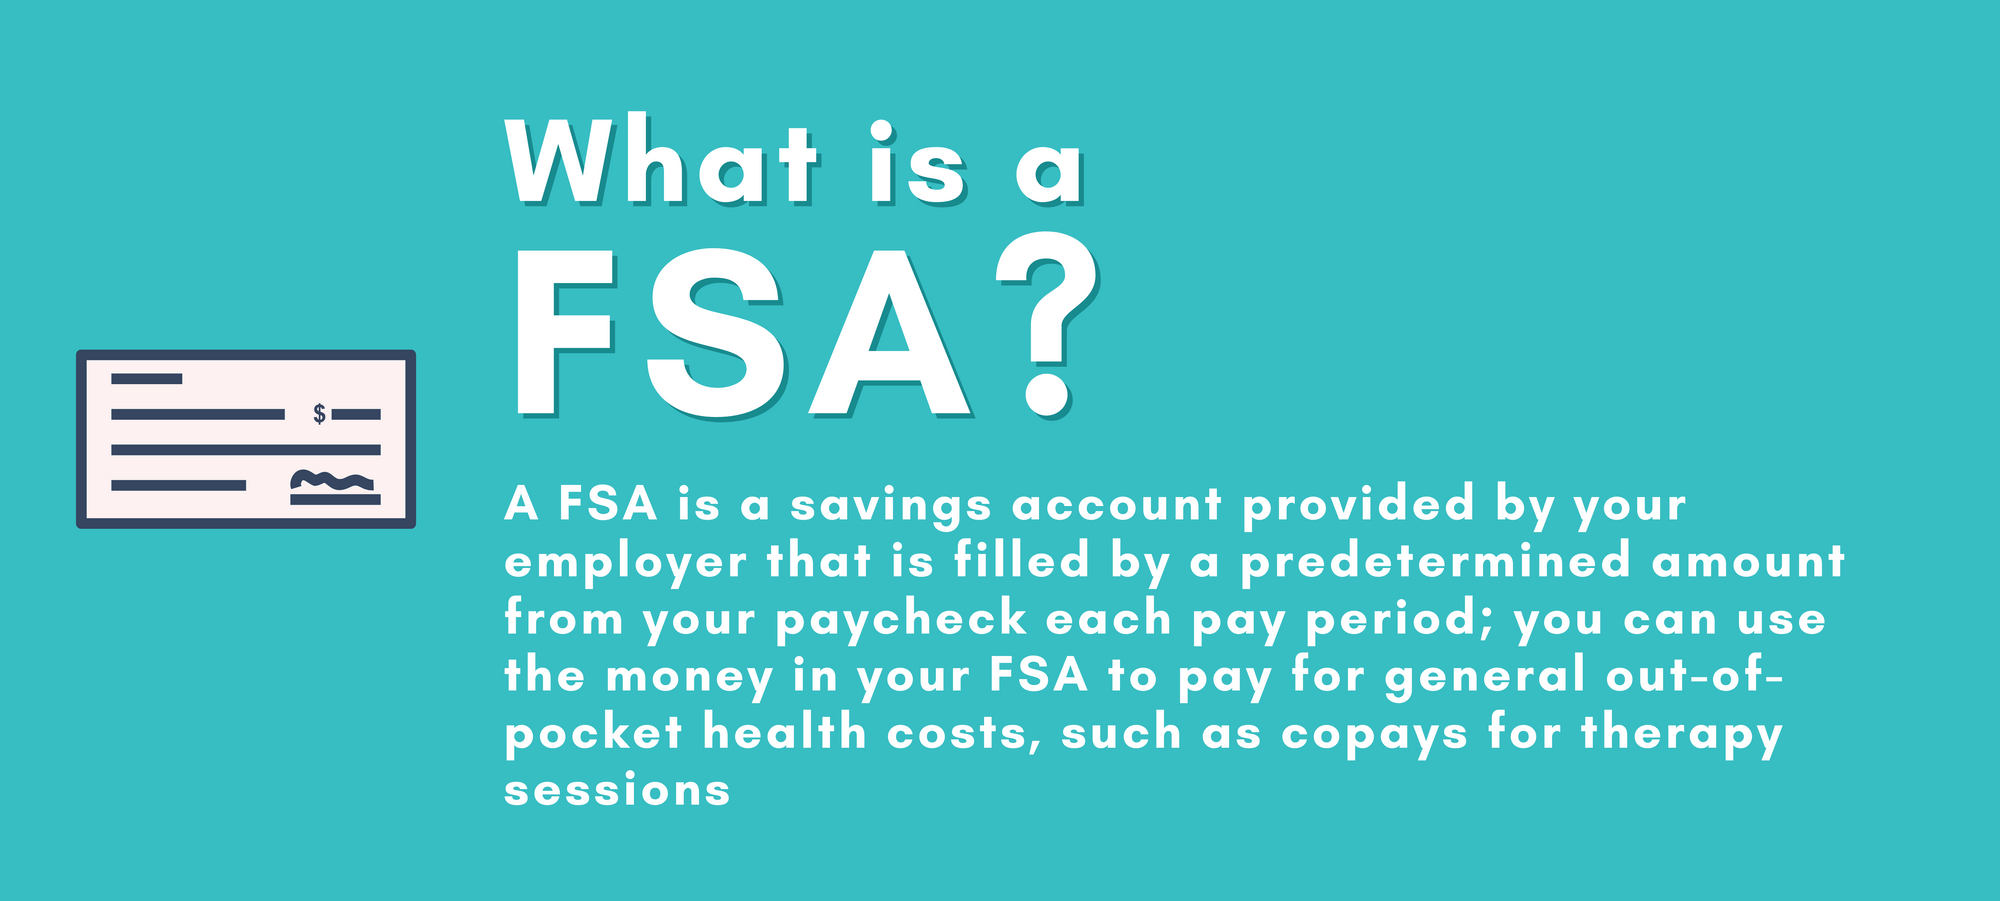 https://assets.zencare.co/2021/06/what-is-fsa-insurance.png